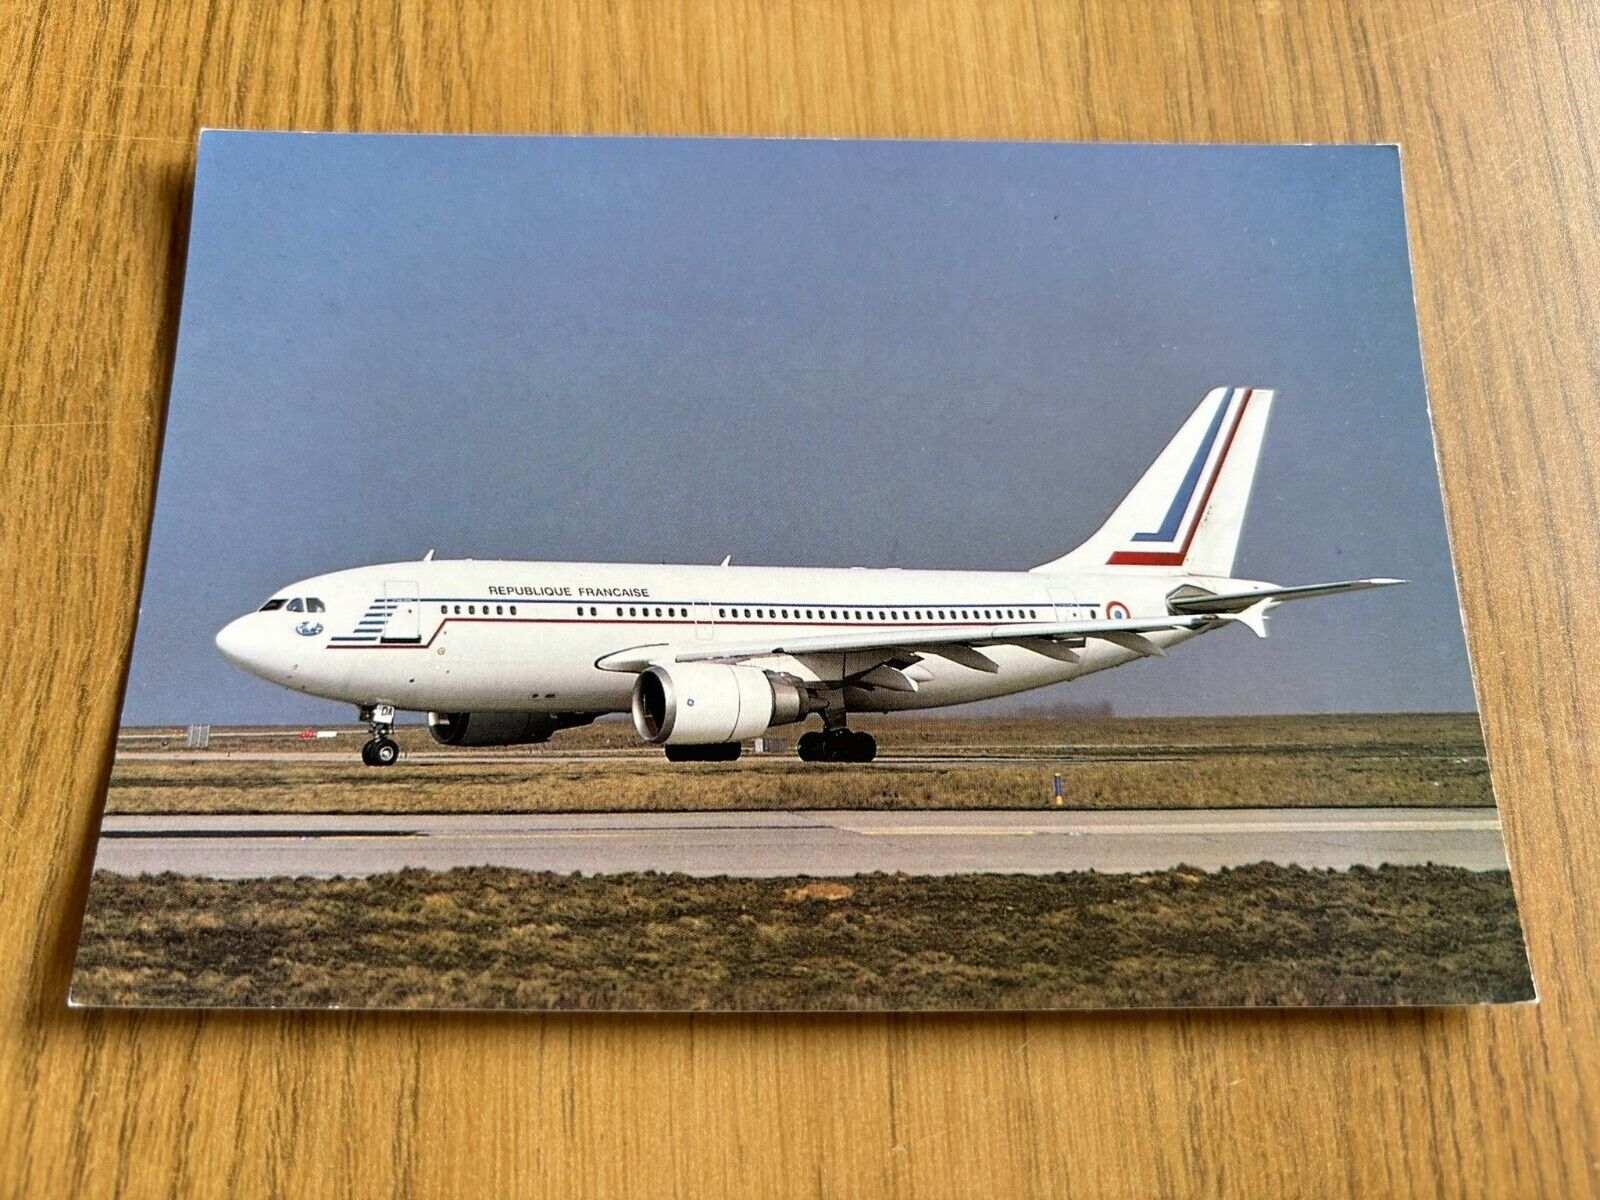 French Air Force Airbus A310 postcard